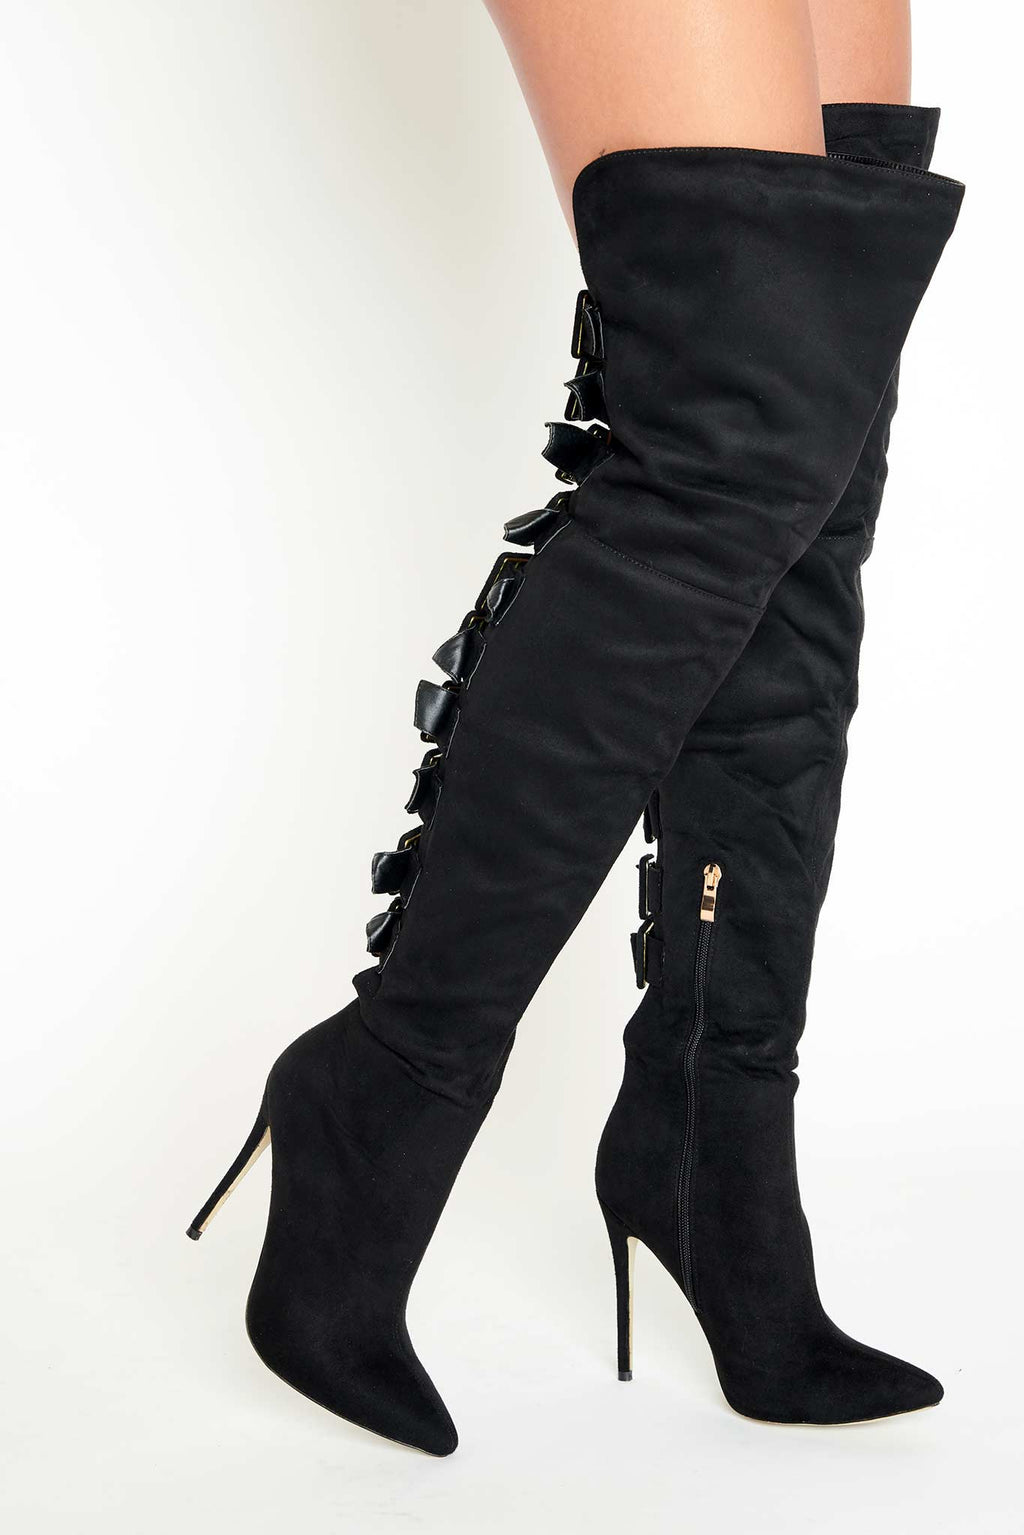 black leather thigh high boots with buckles